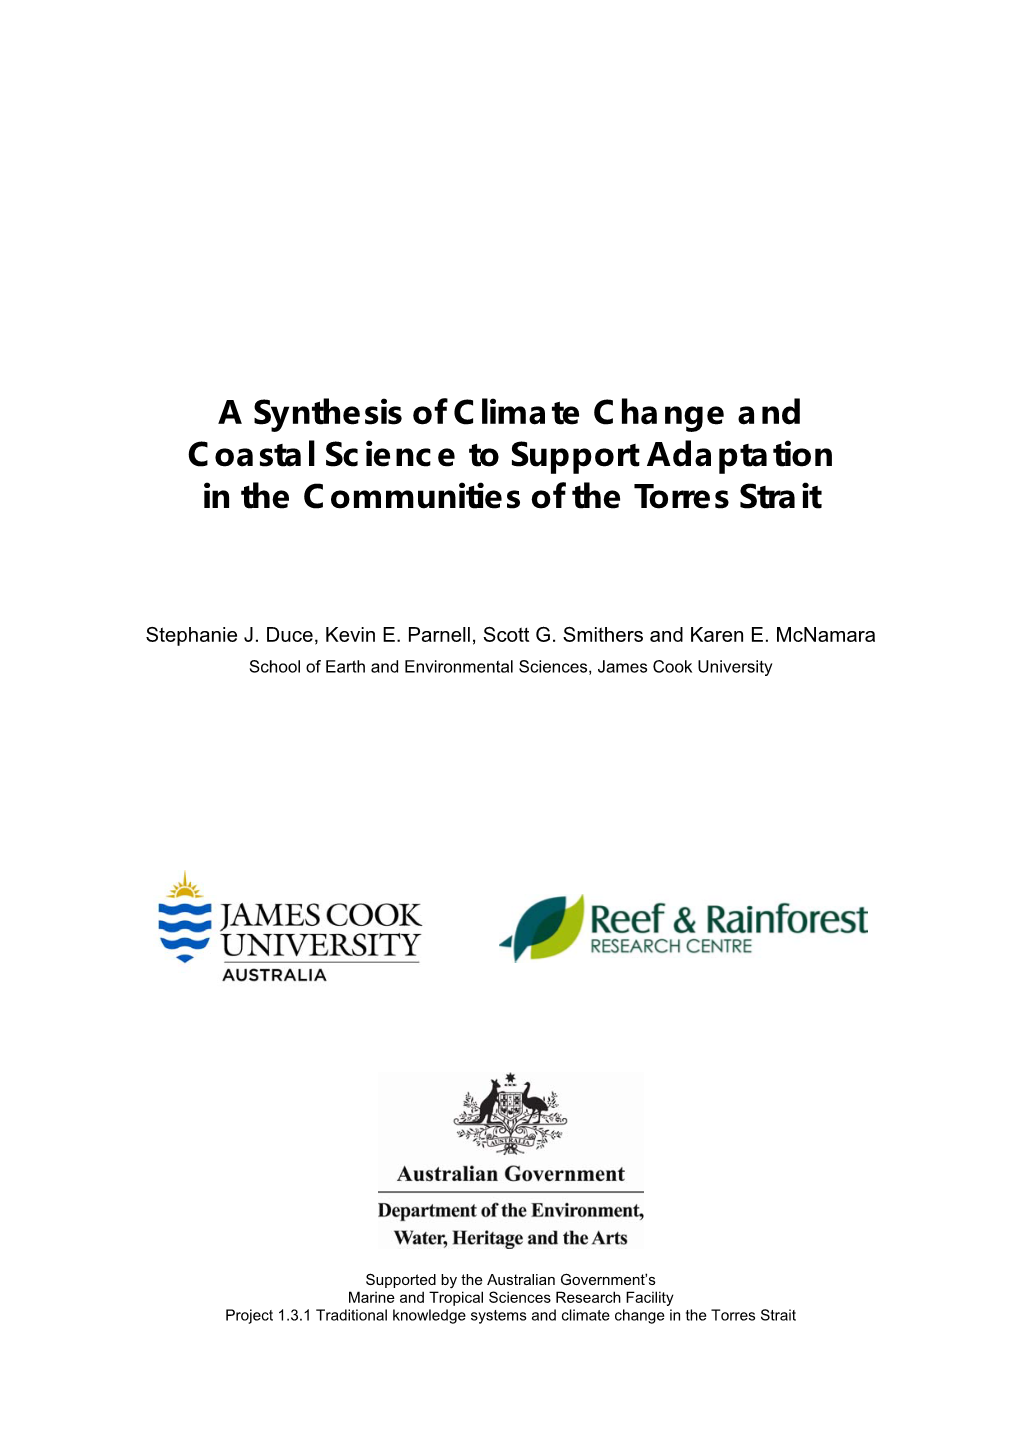 A Synthesis of Climate Change and Coastal Science to Support Adaptation in the Communities of the Torres Strait